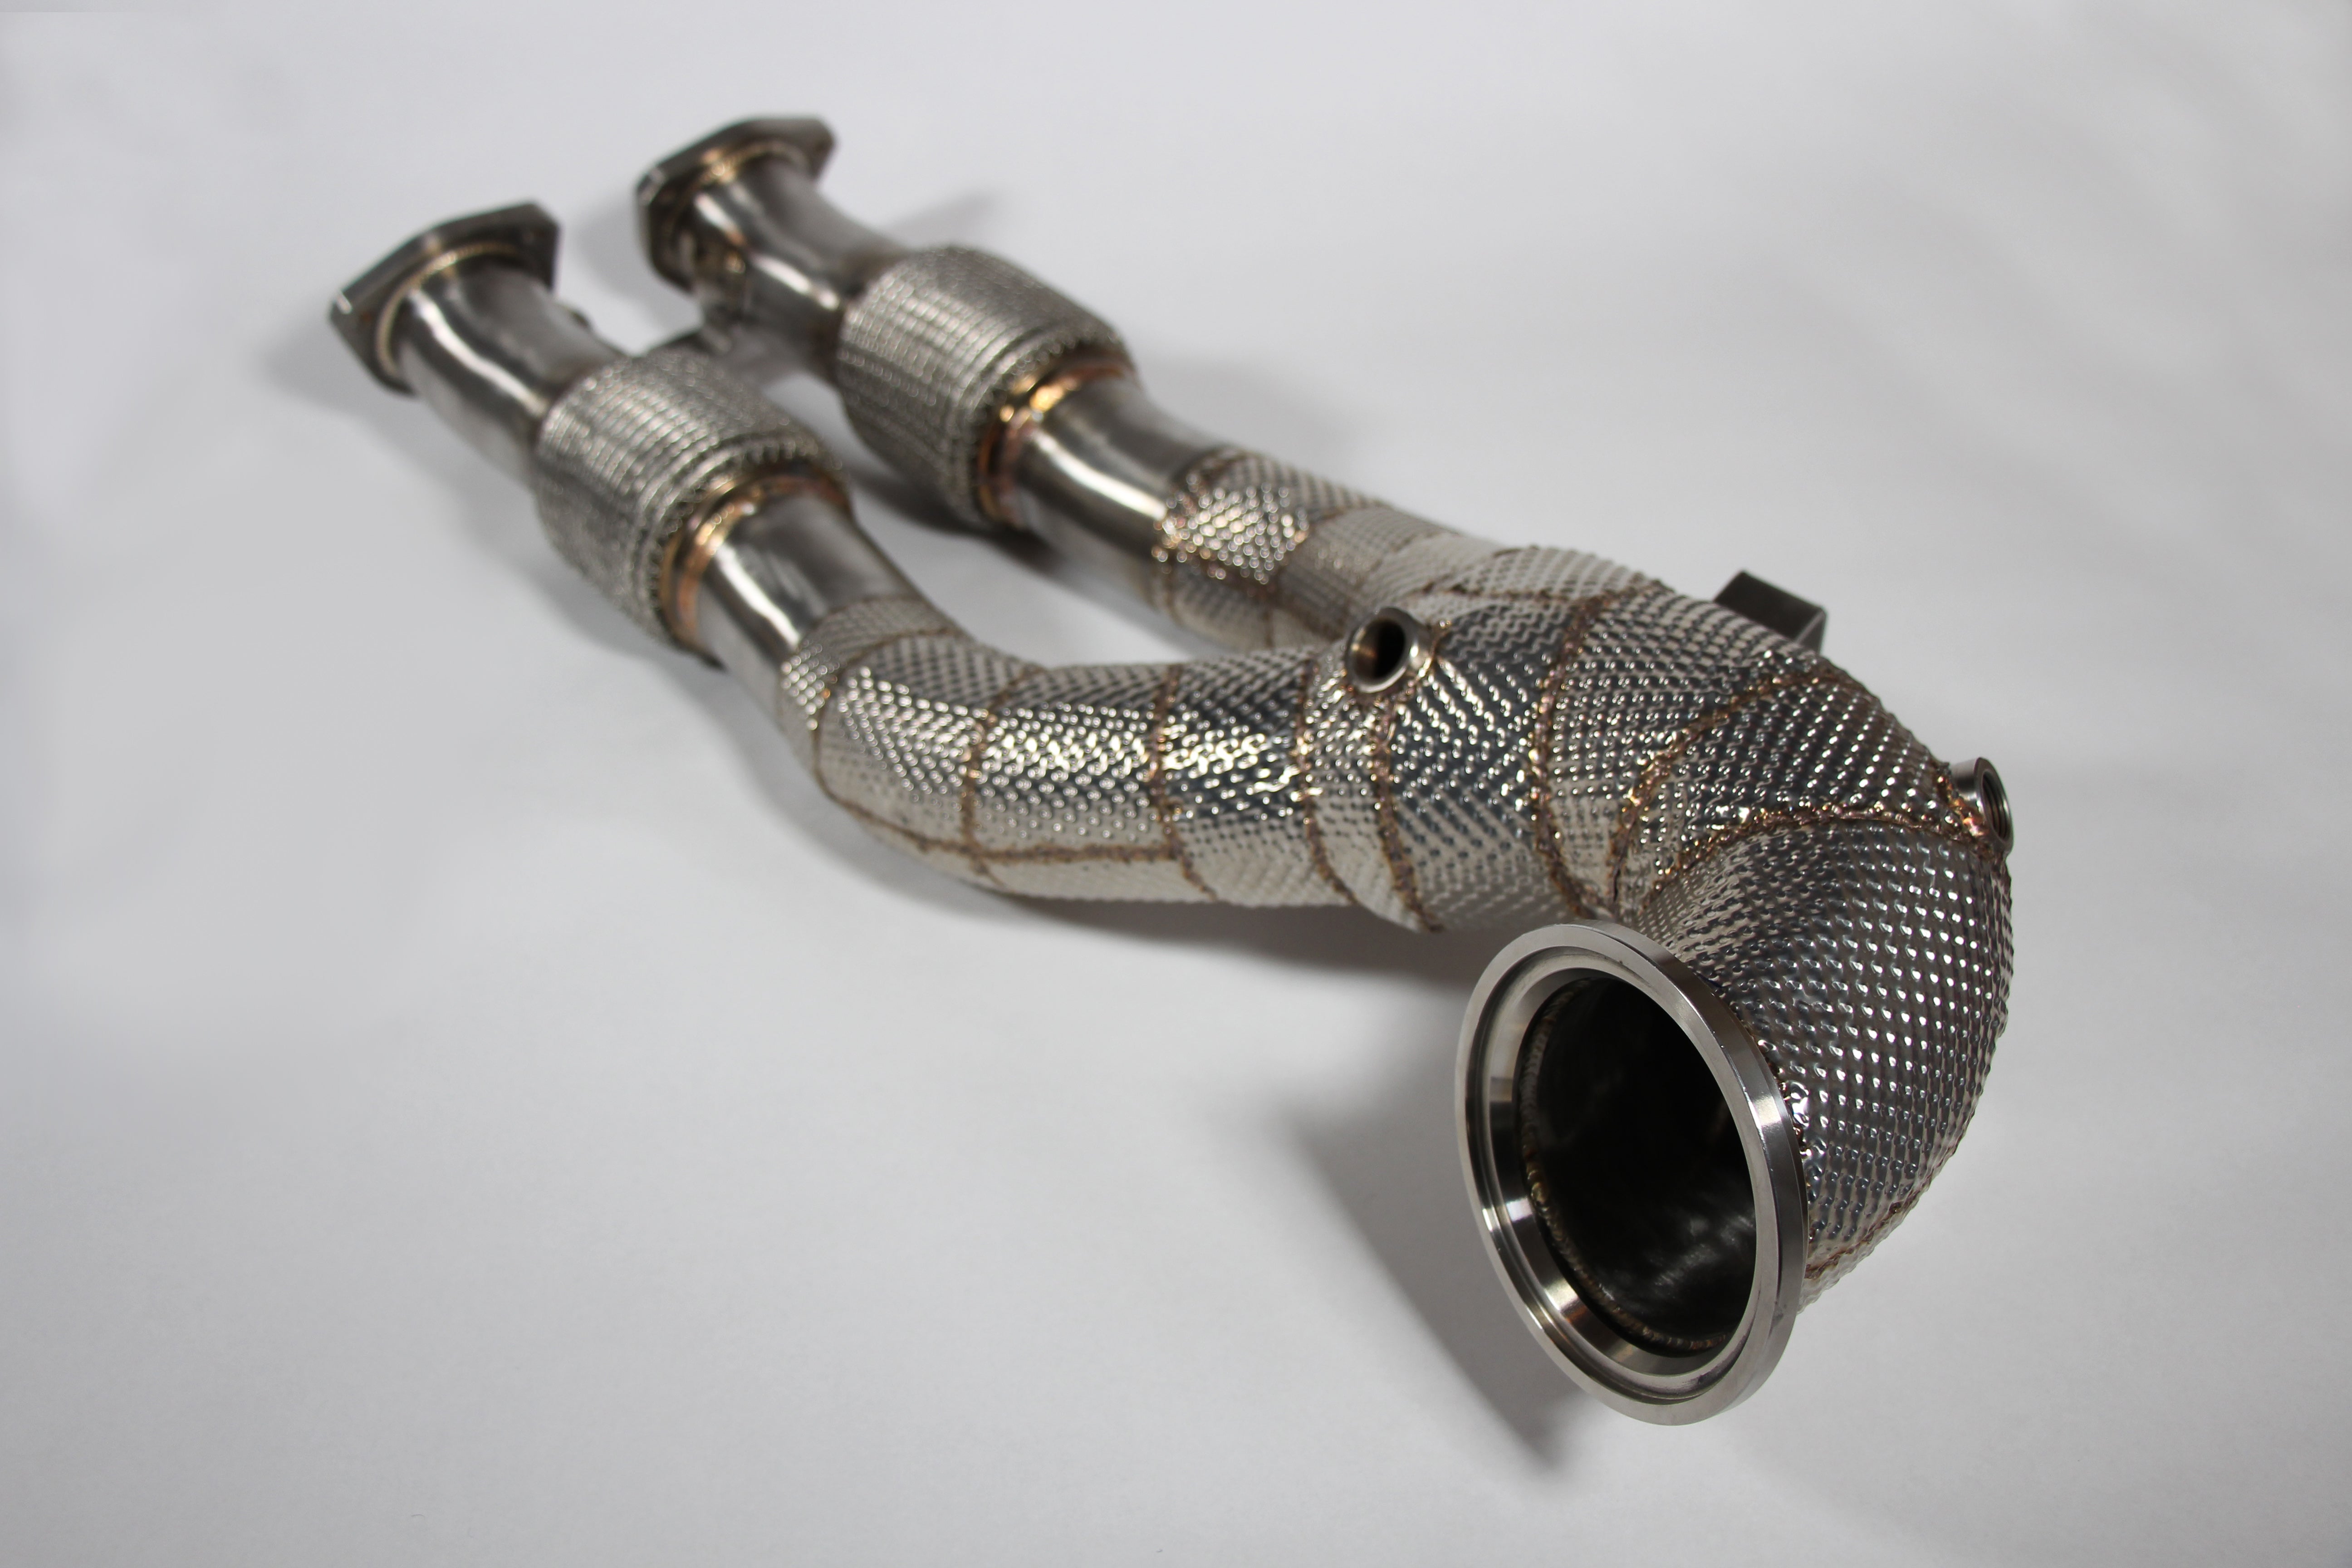 8V RS3 / 8S TTRS 2.5T EVO CATLESS DOWNPIPE